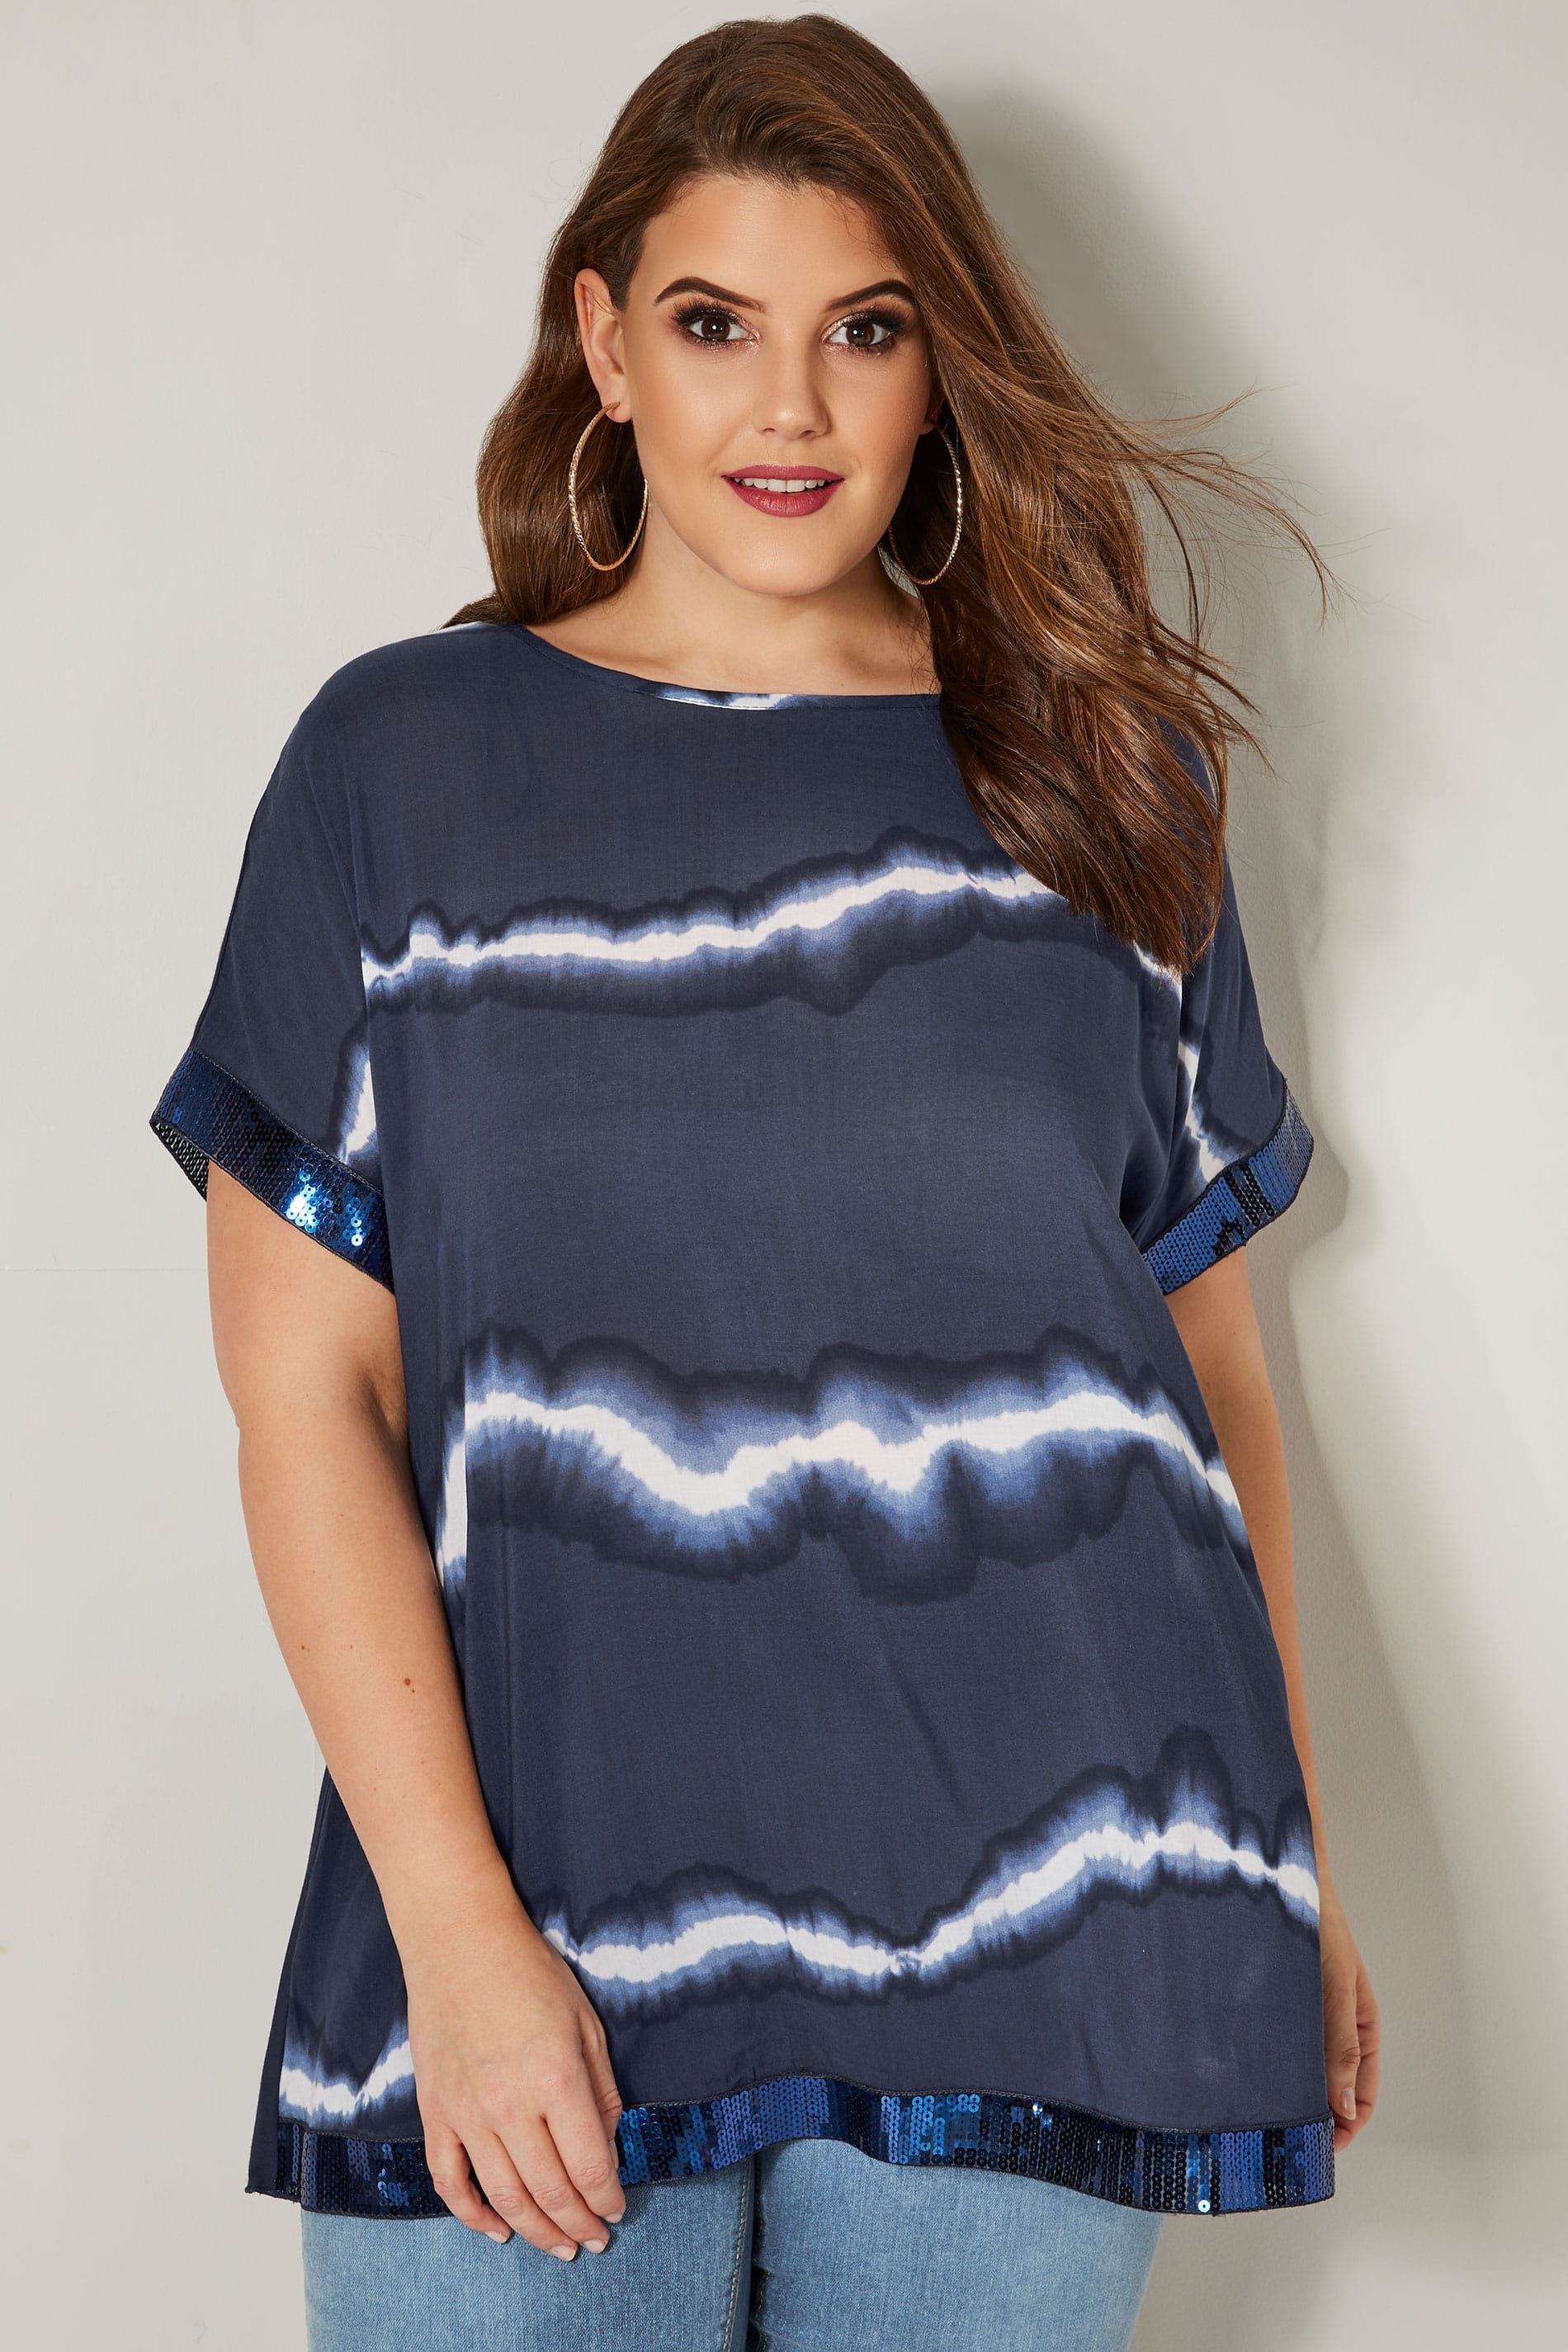 Navy Tie Dye Chiffon Cape Top With Sequin Trim, Plus size 16 to 36